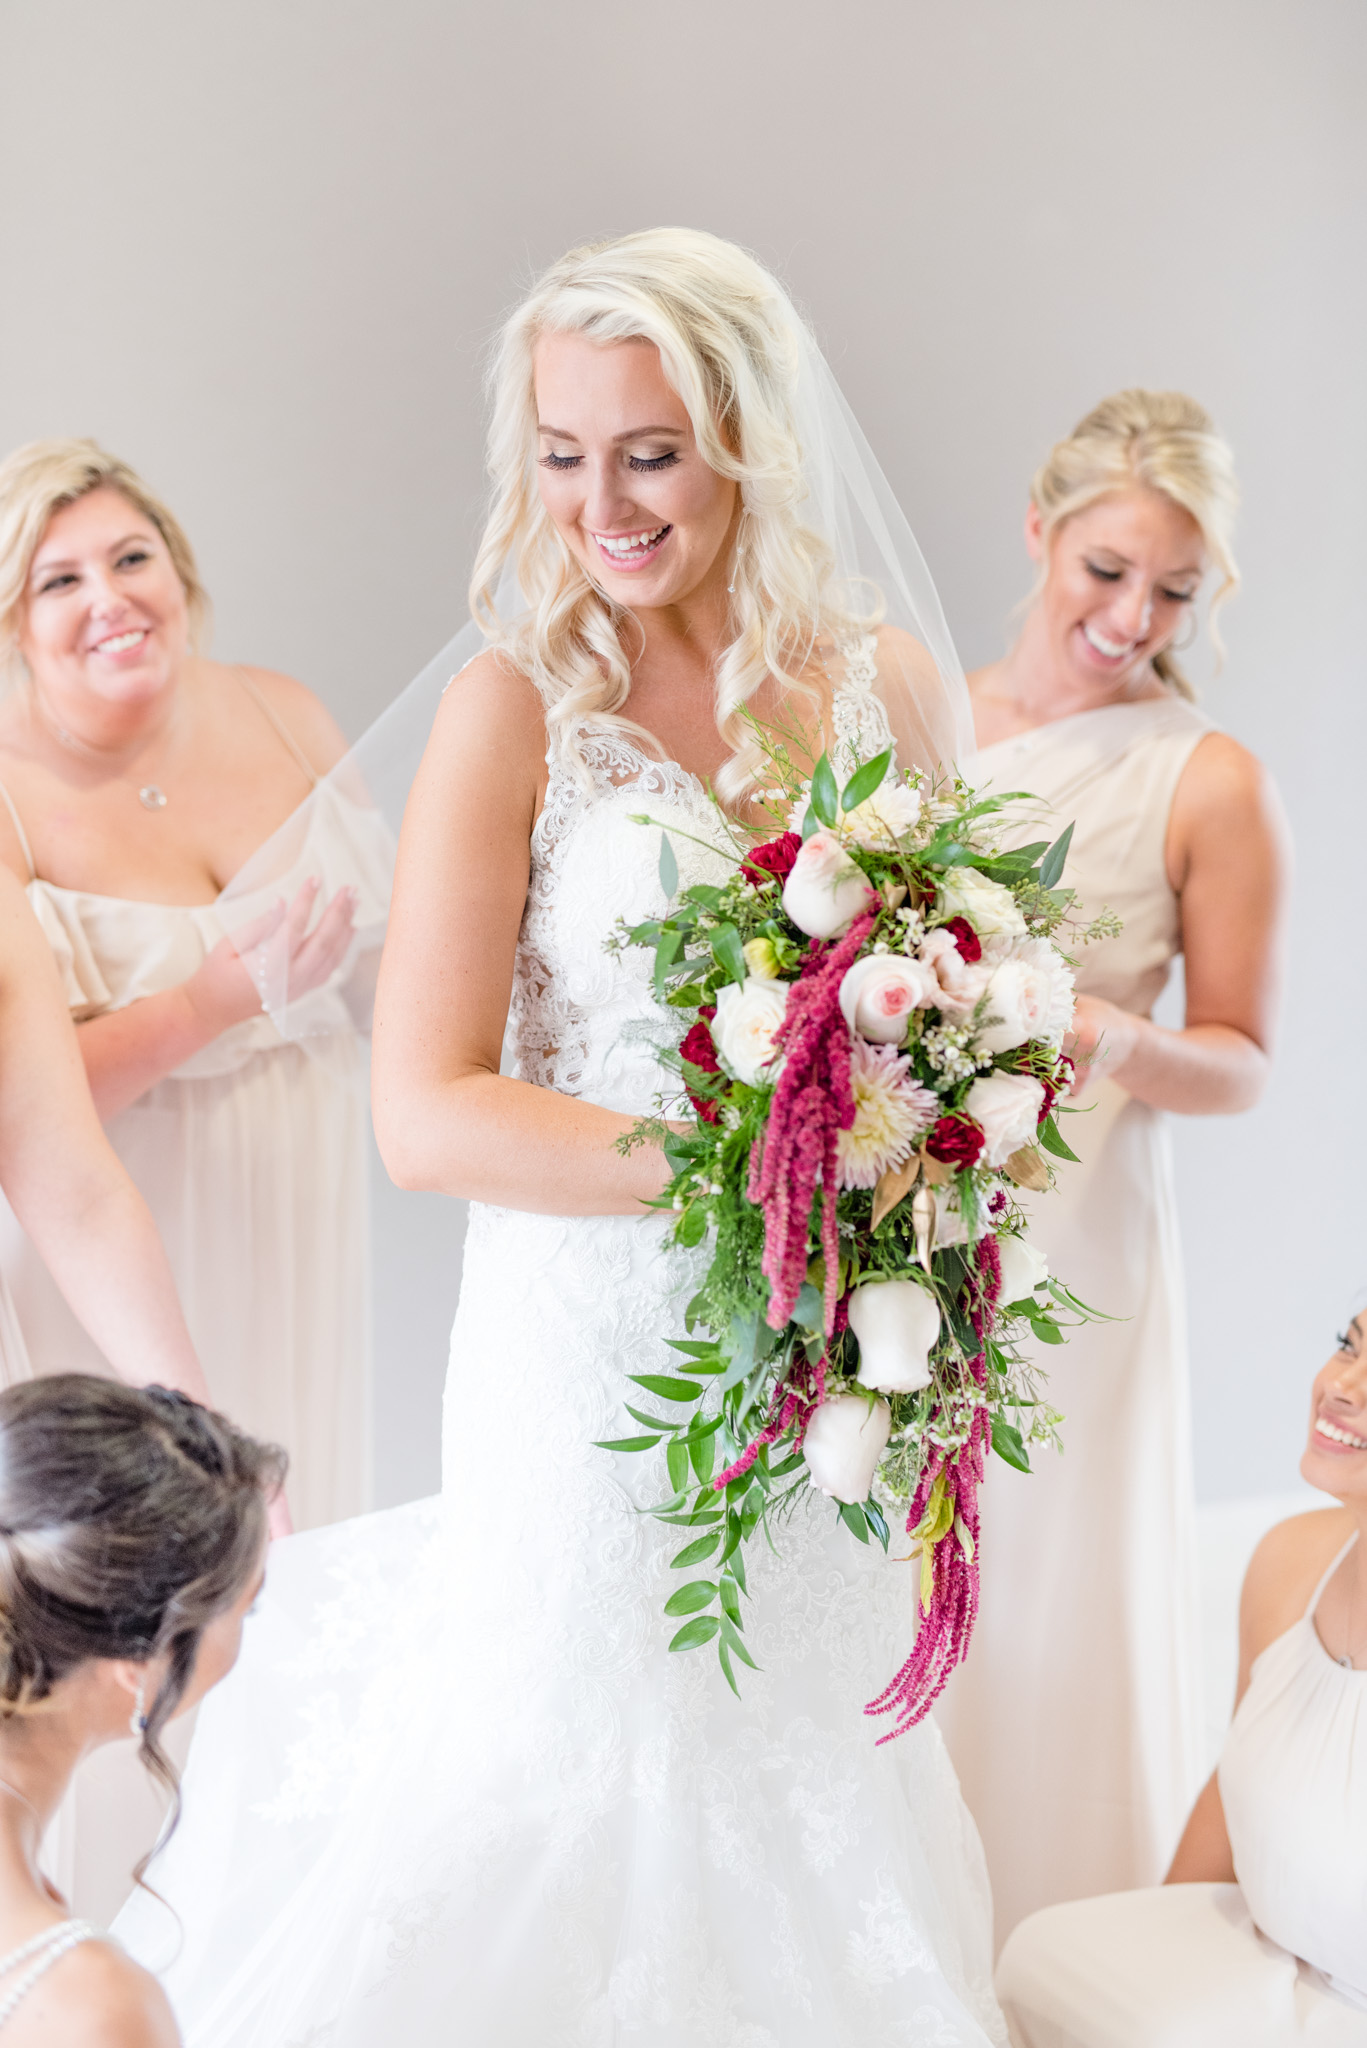 Bride laughs with friends.